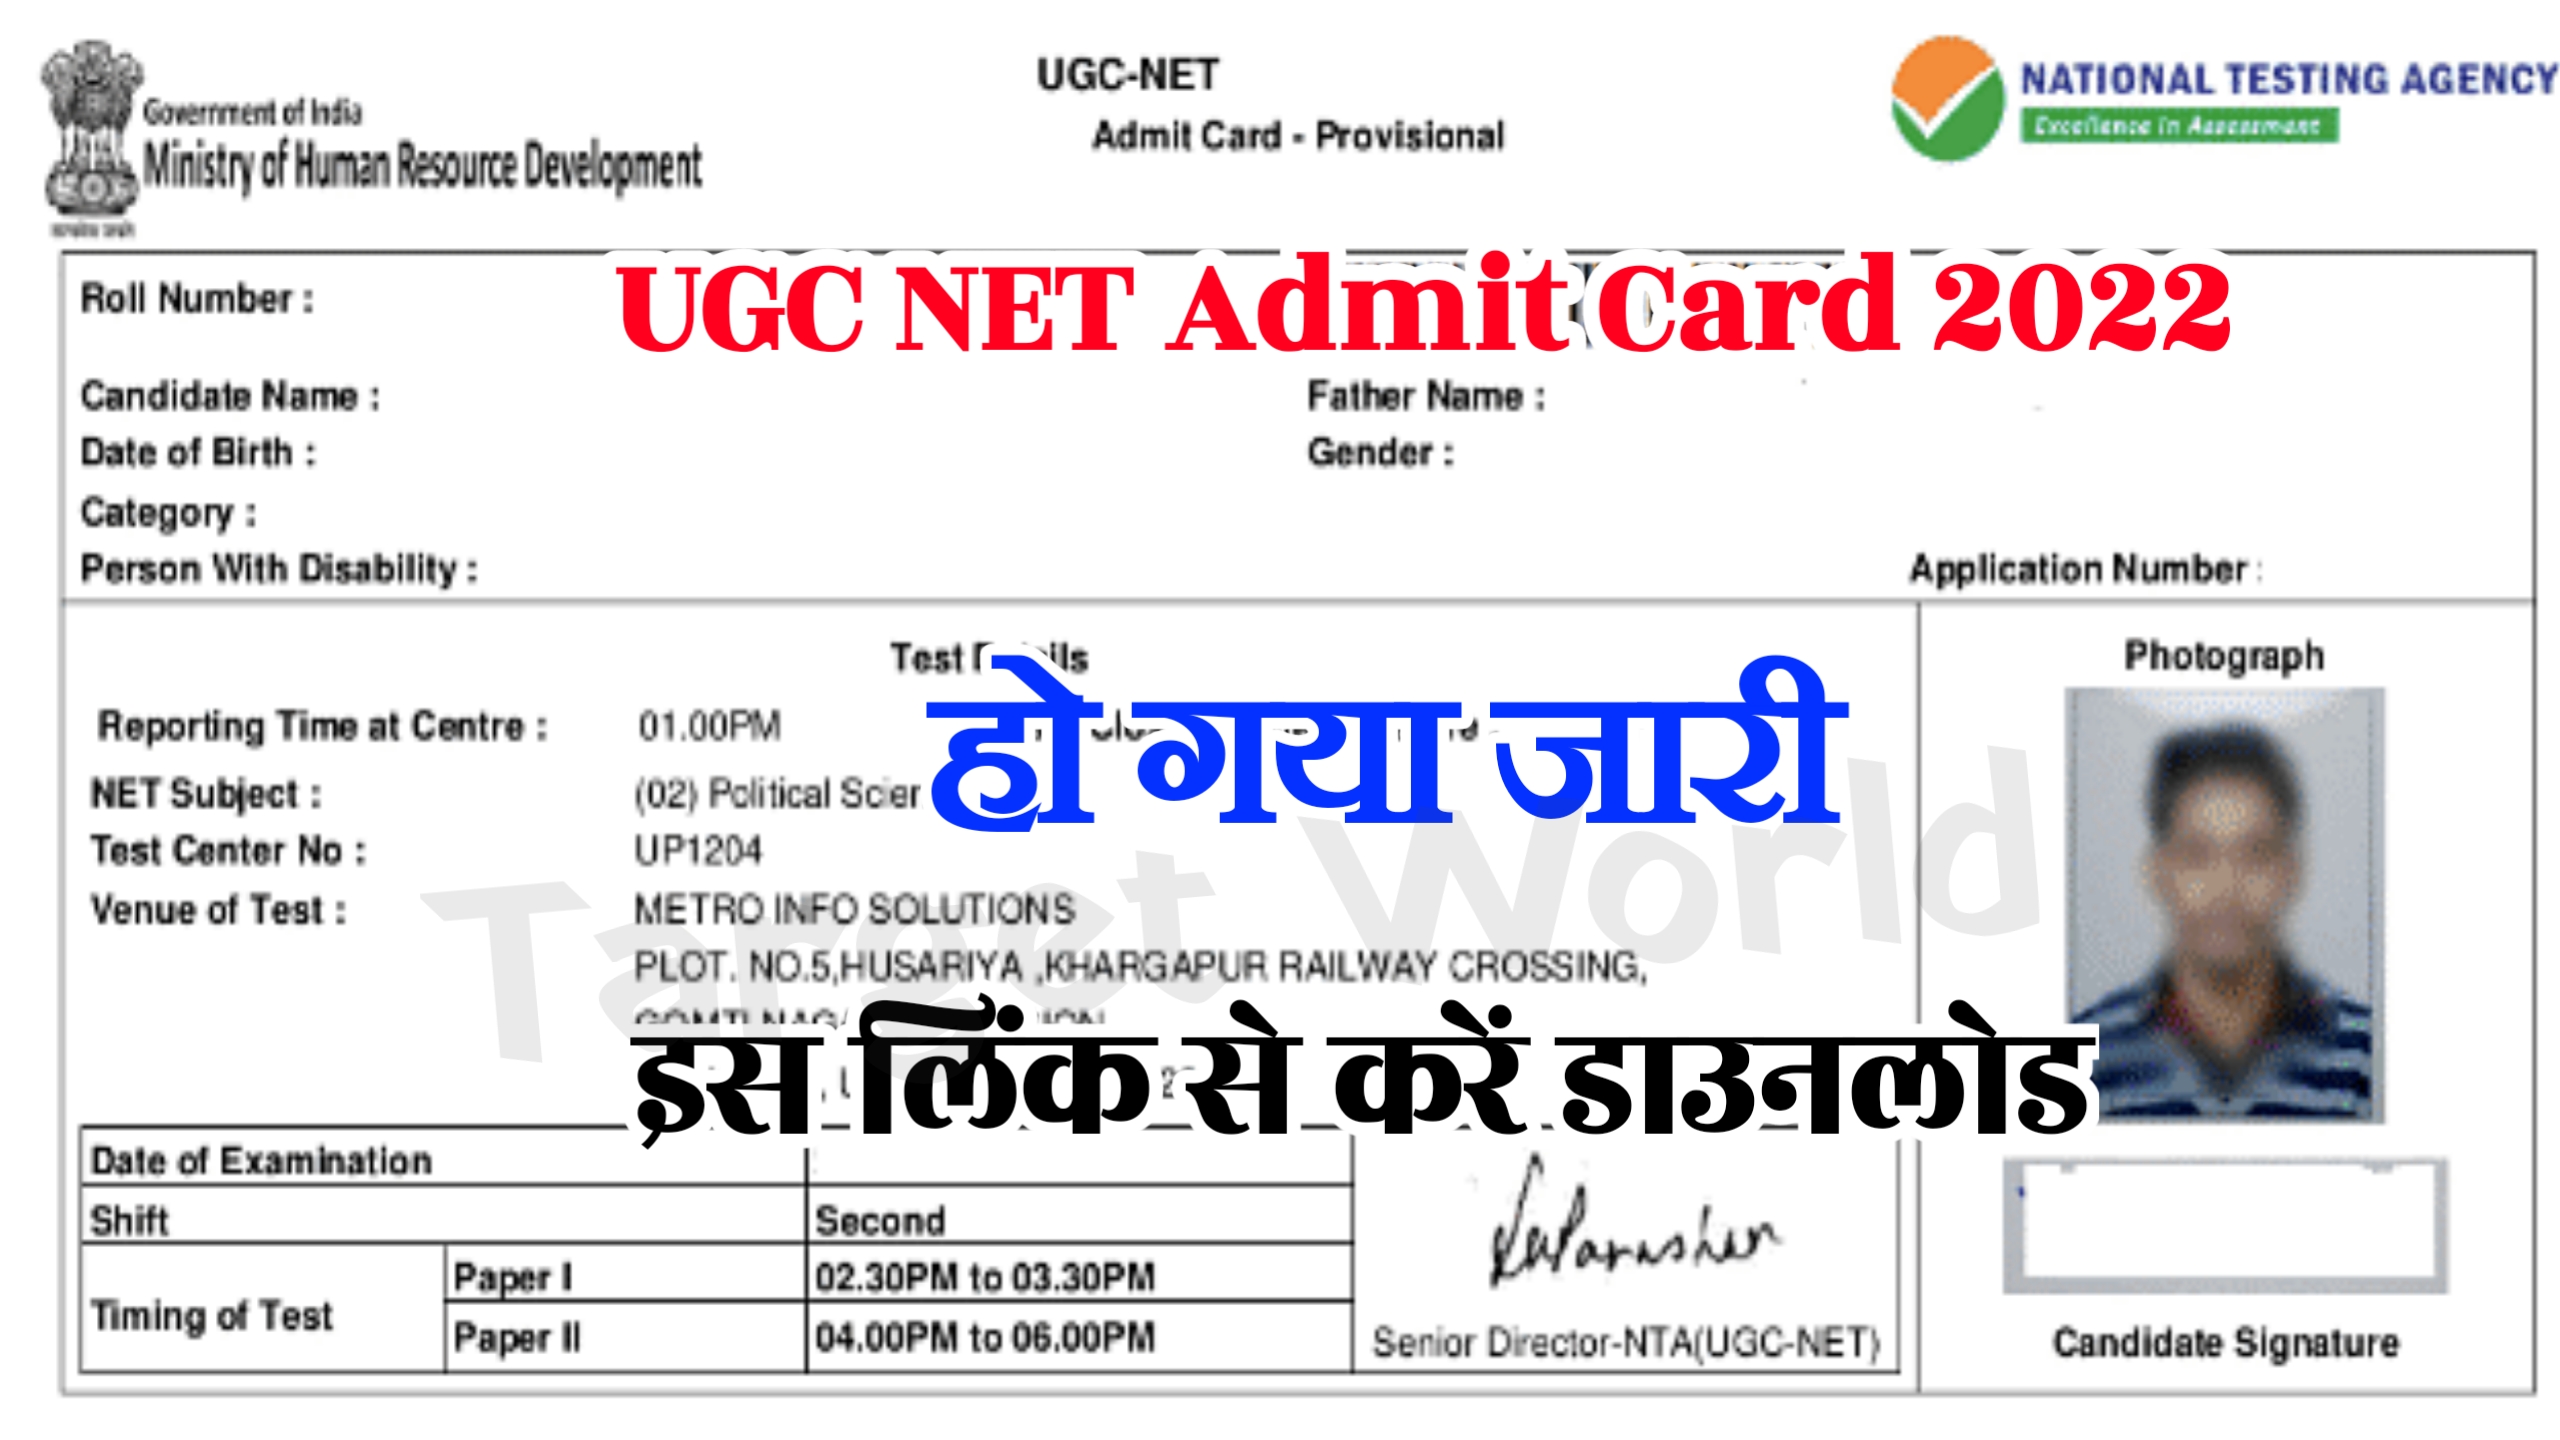 UGC NET Admit Card 2022 Download ~ Check Now 2022@ugcnet.nta.nic.in